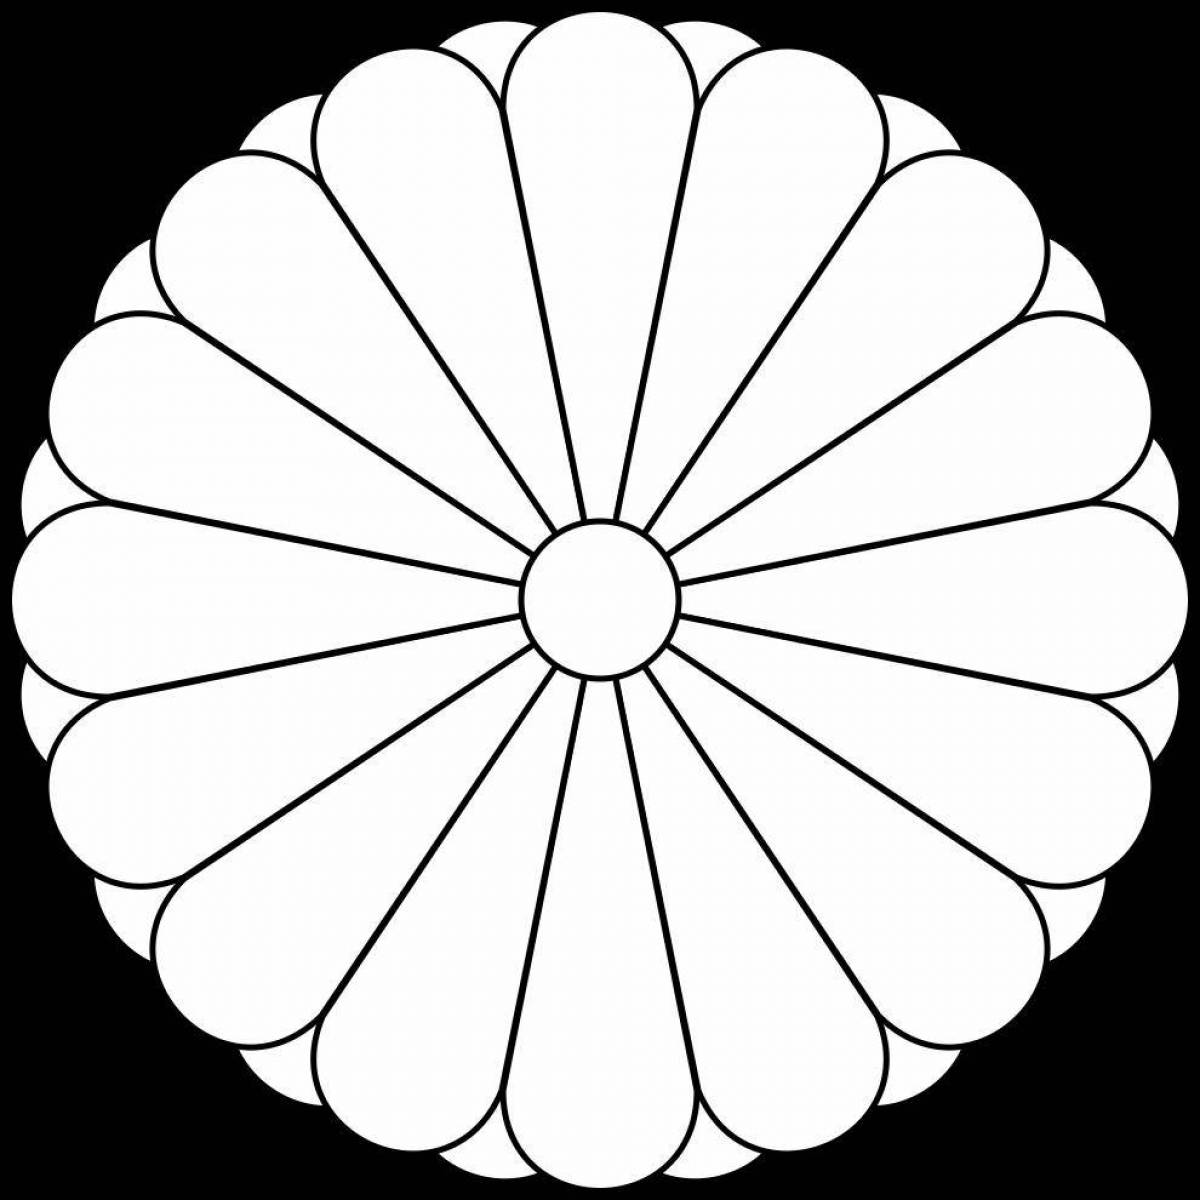 Animated japan flag coloring page